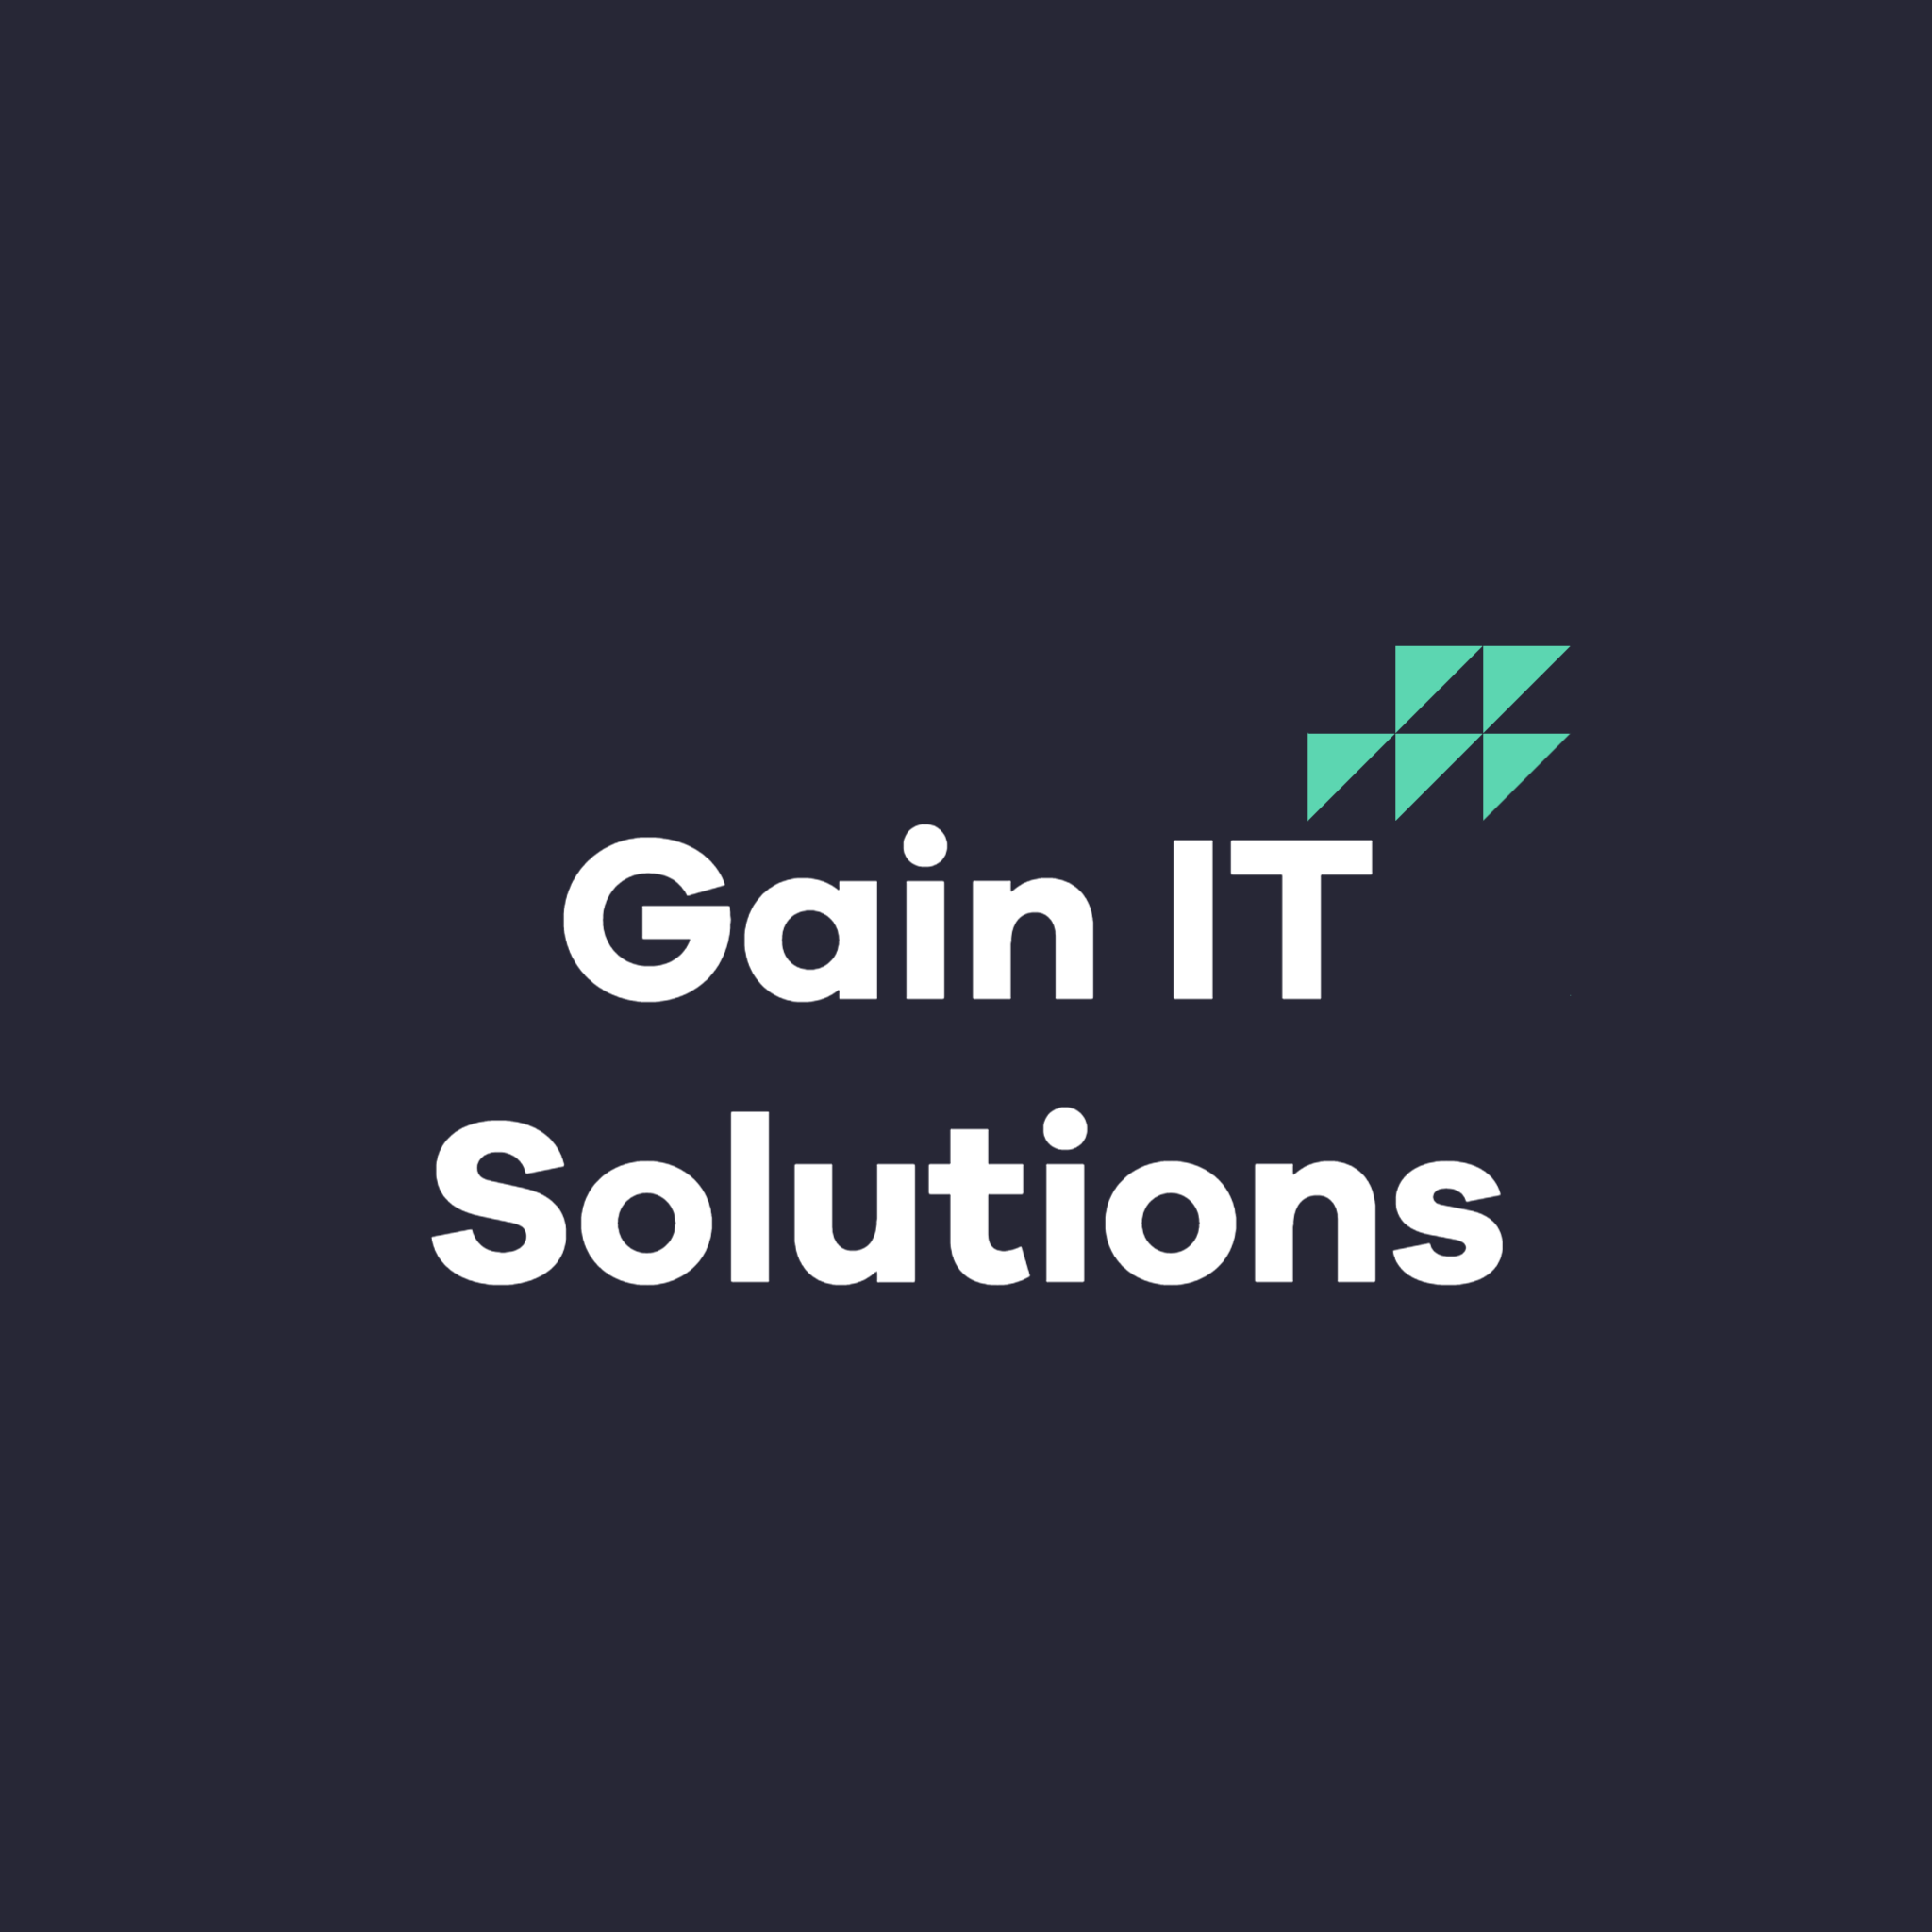 Gain IT Solutions